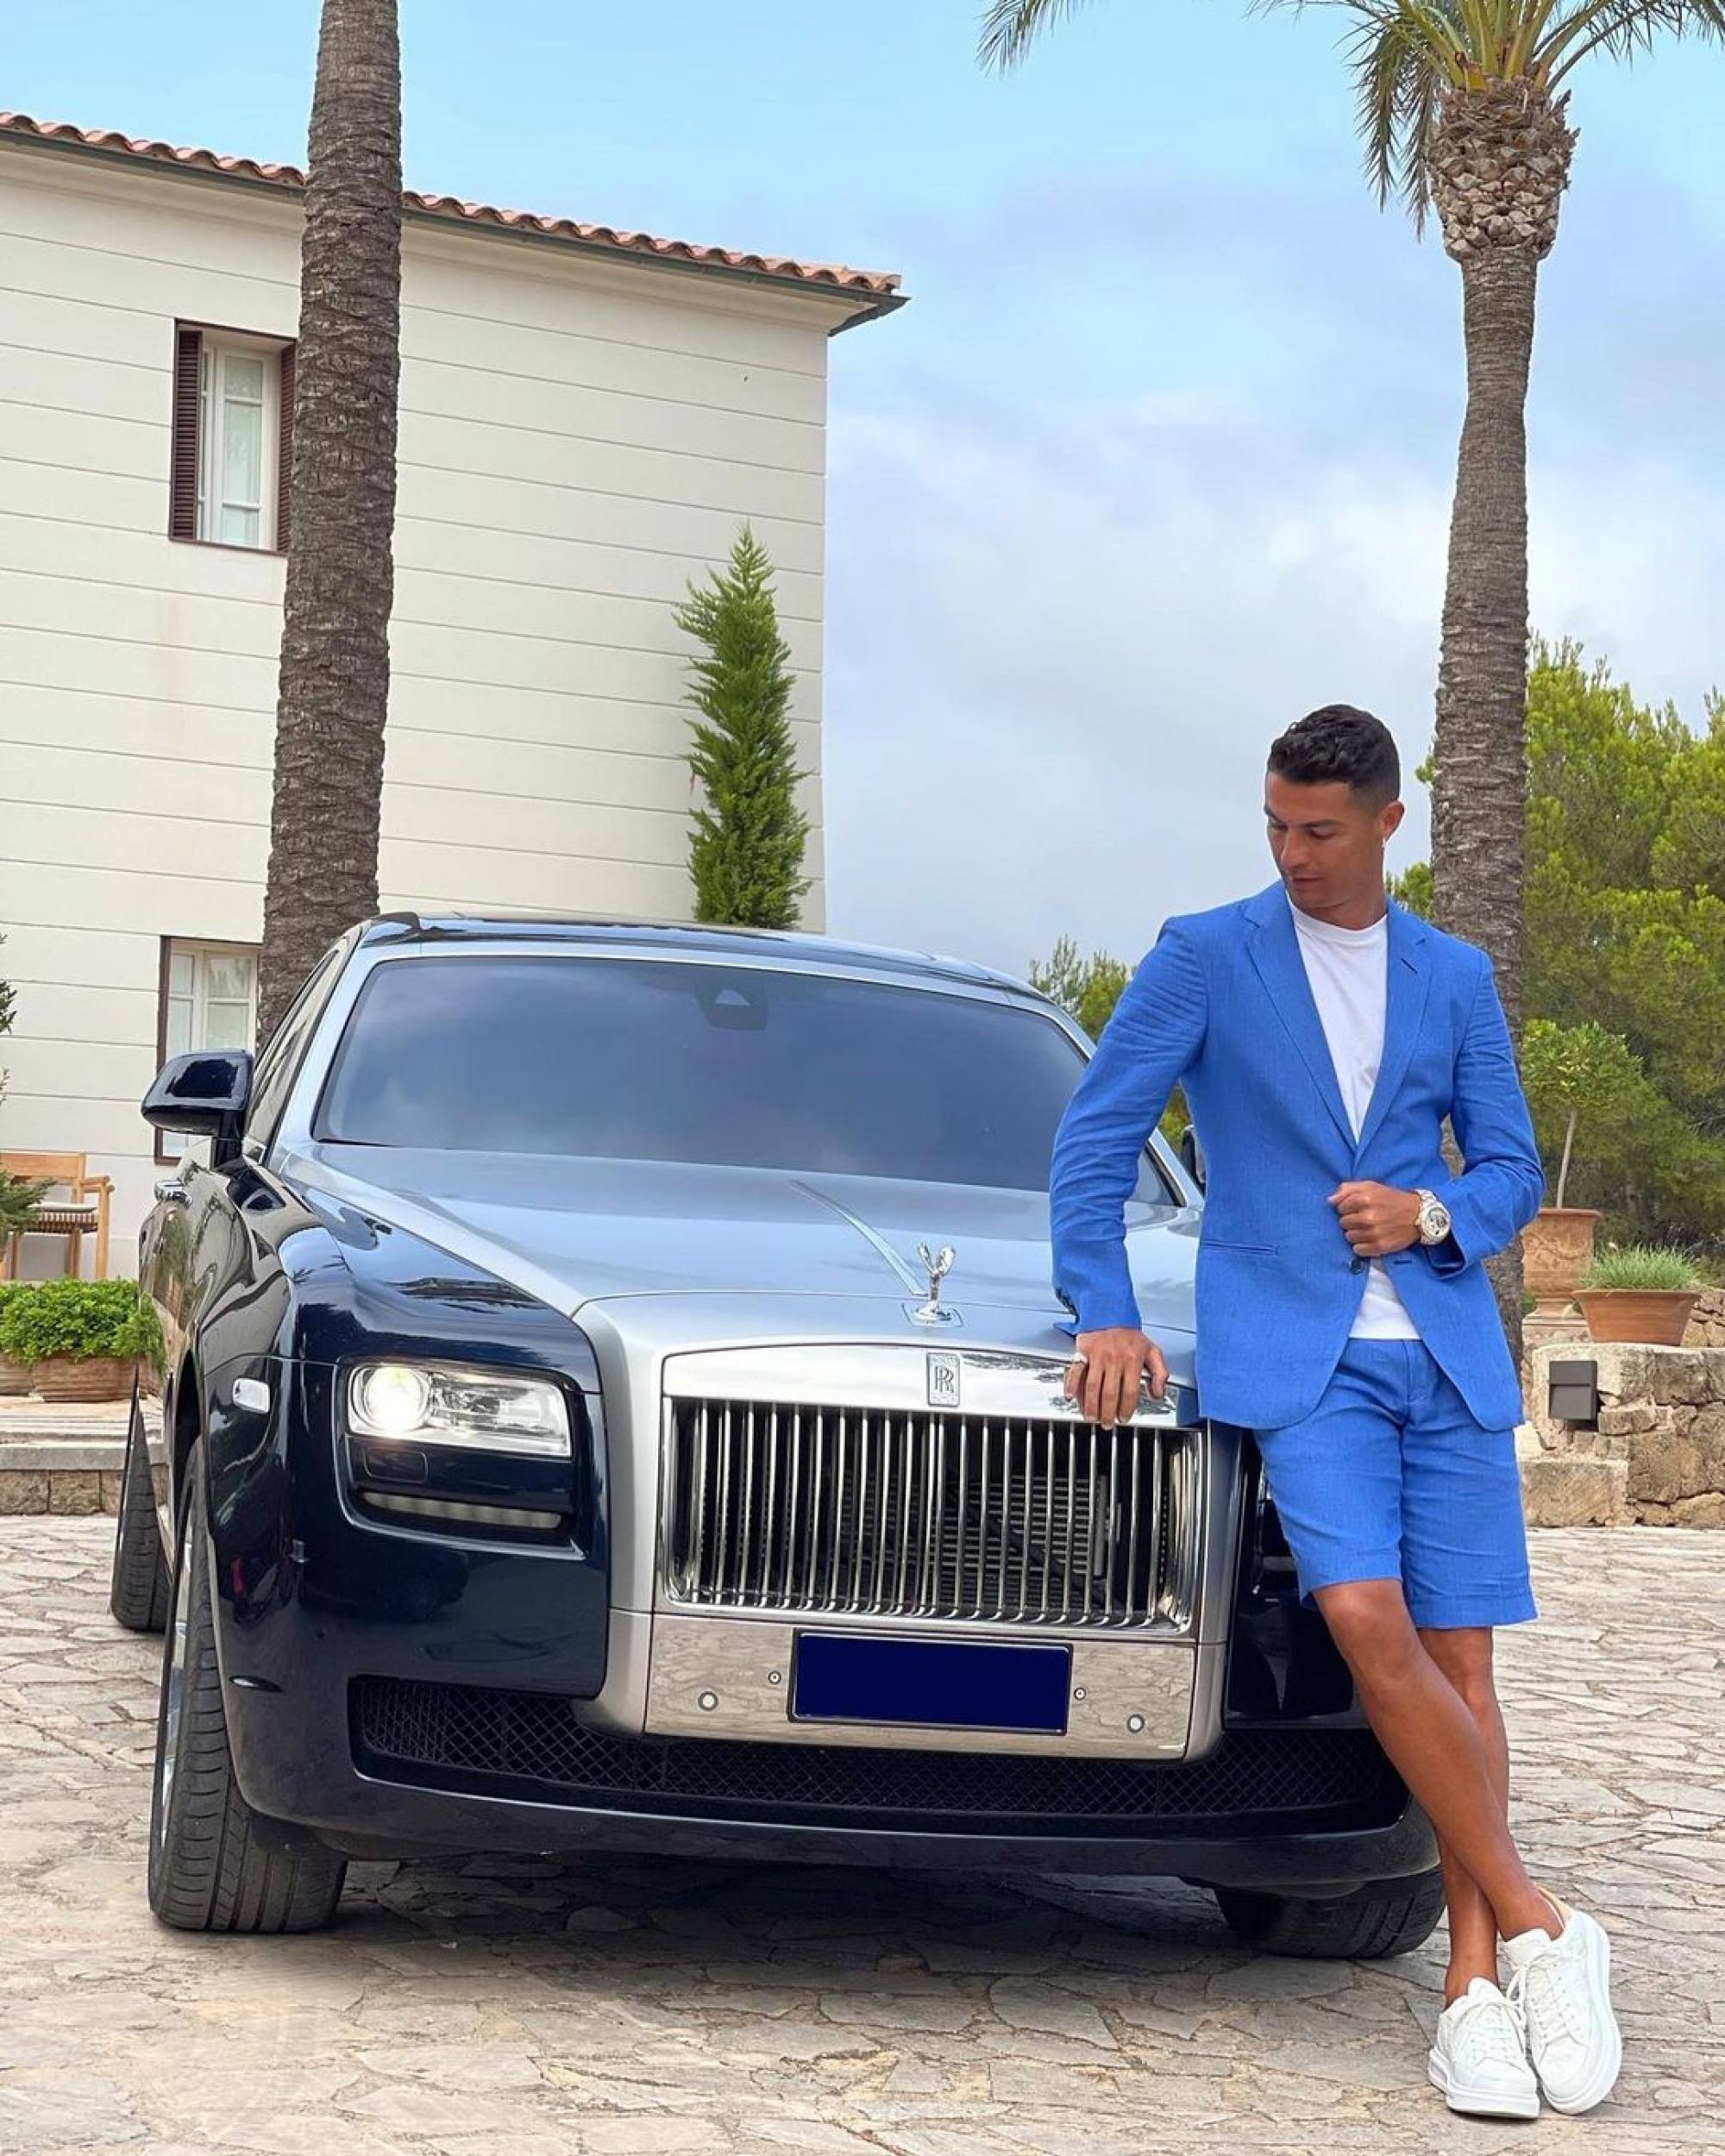 7 of Cristiano Ronaldo's most expensive watches: from his Bugatti